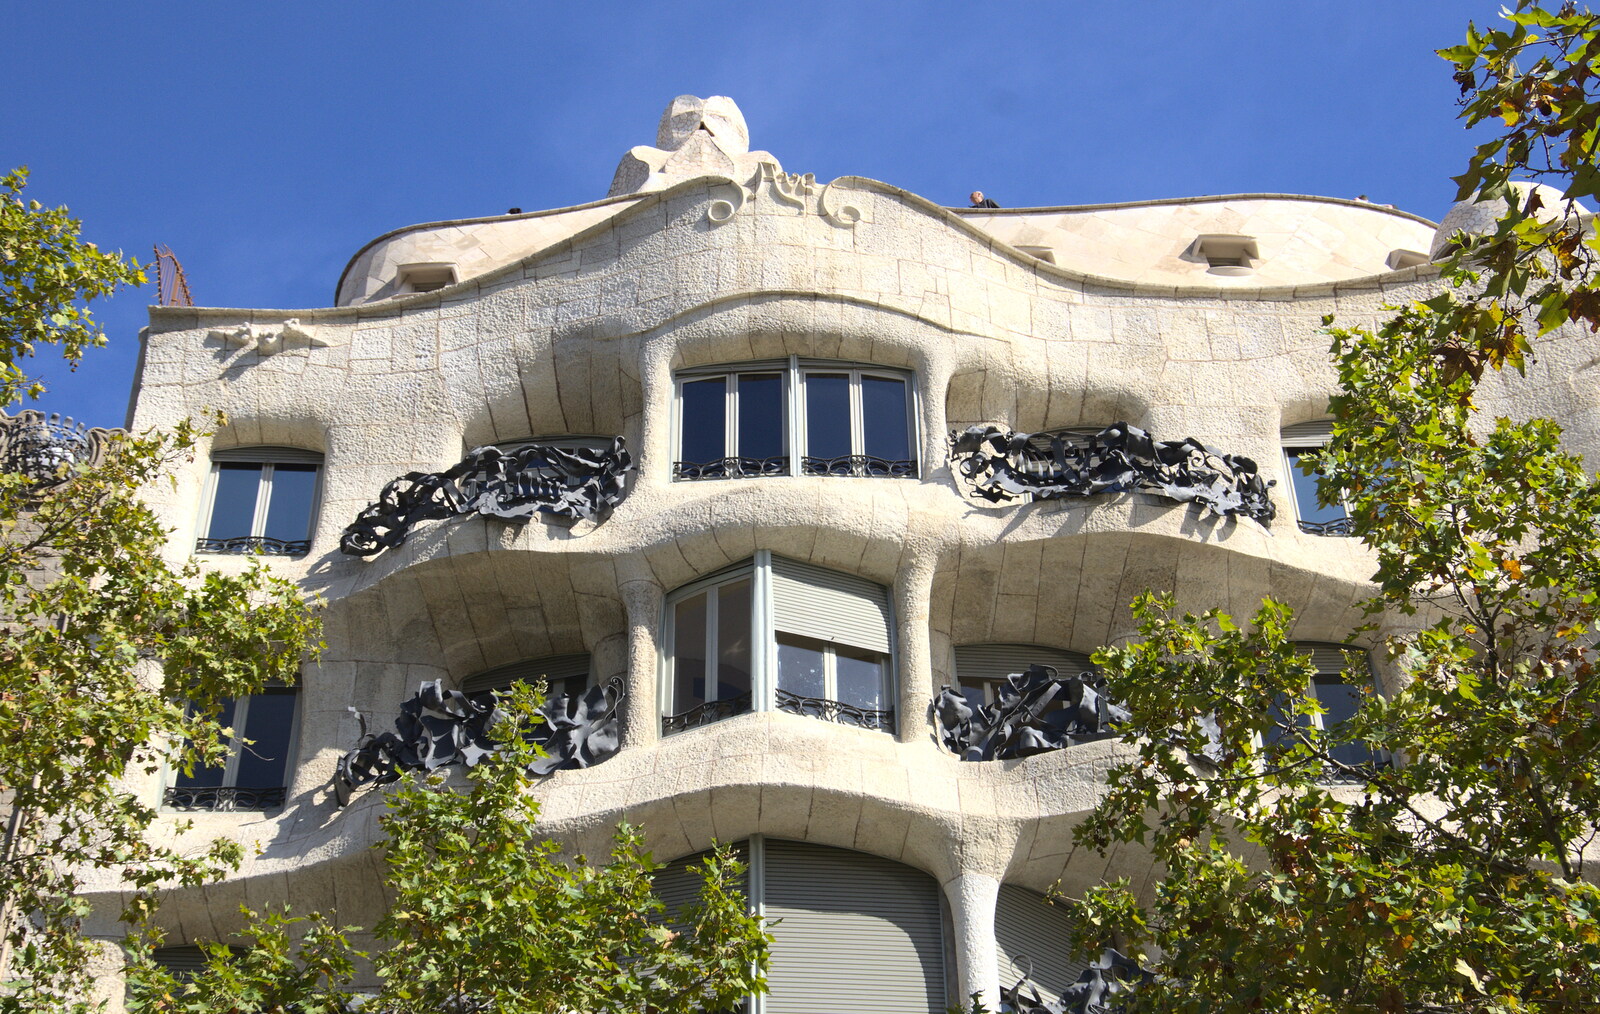 Gaudi's last domestic apartment project from A Barcelona Bus Tour, Catalonia, Spain - 25th October 2017